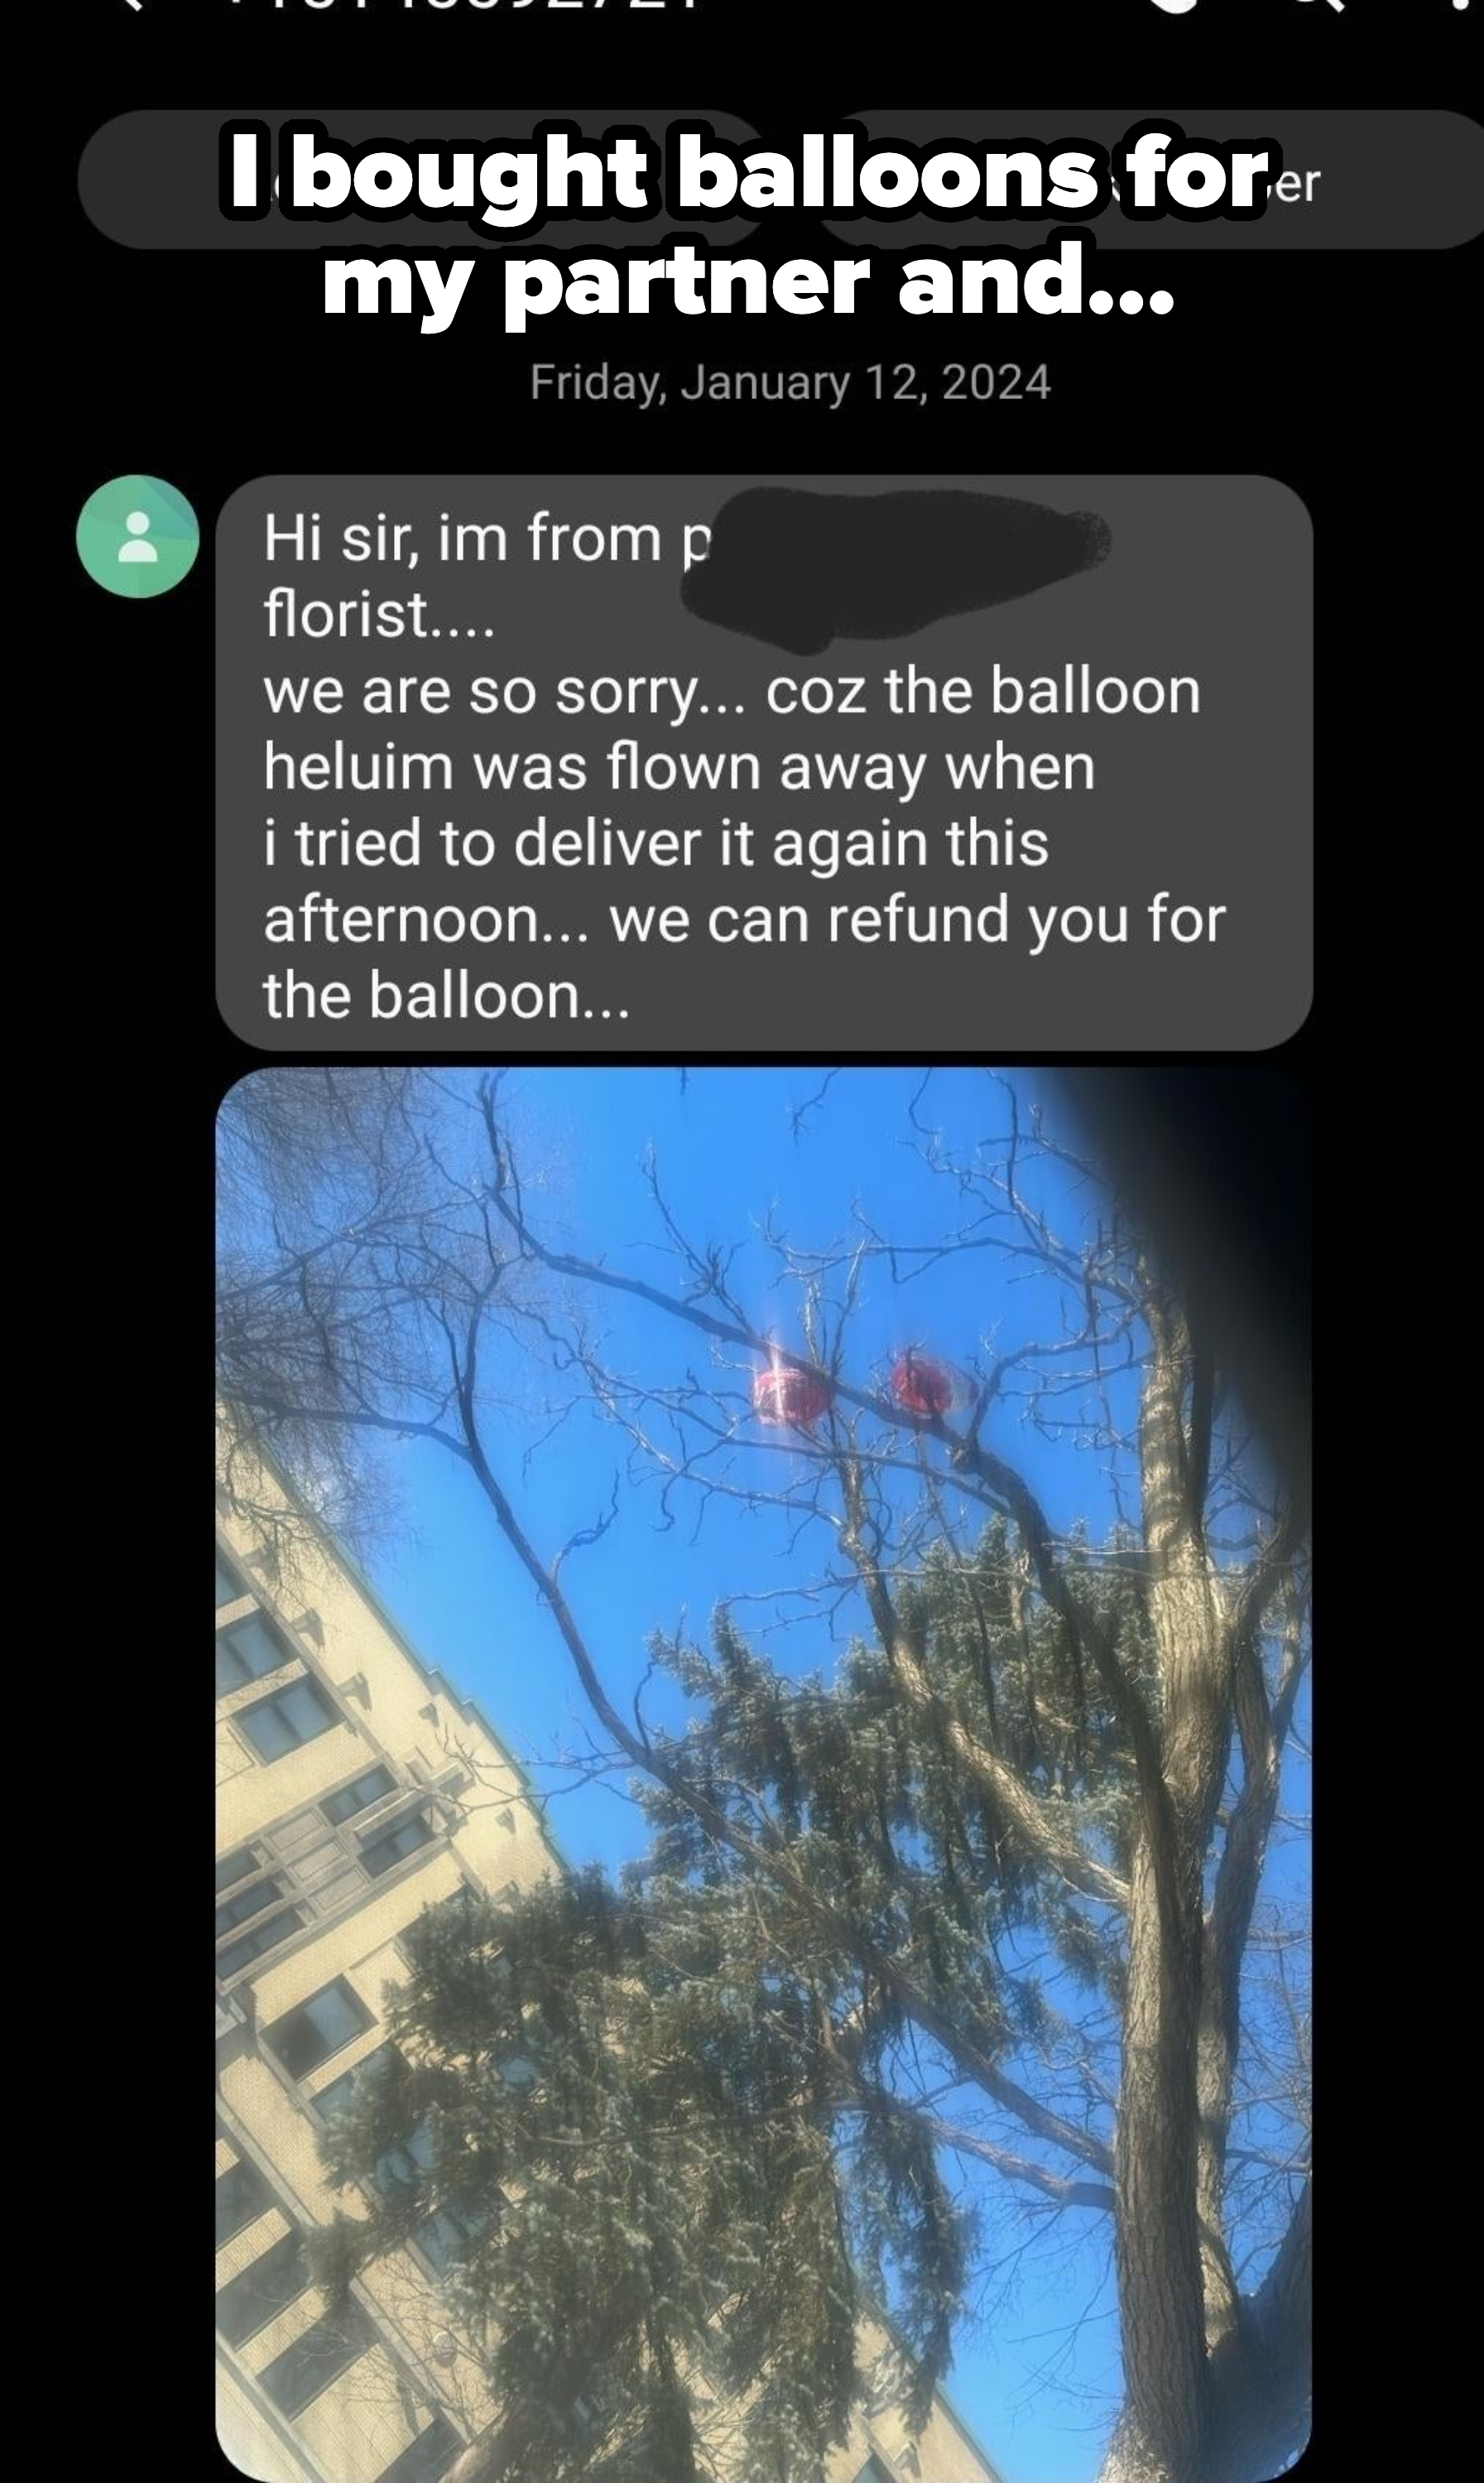 A present of helium balloons stuck in a tree